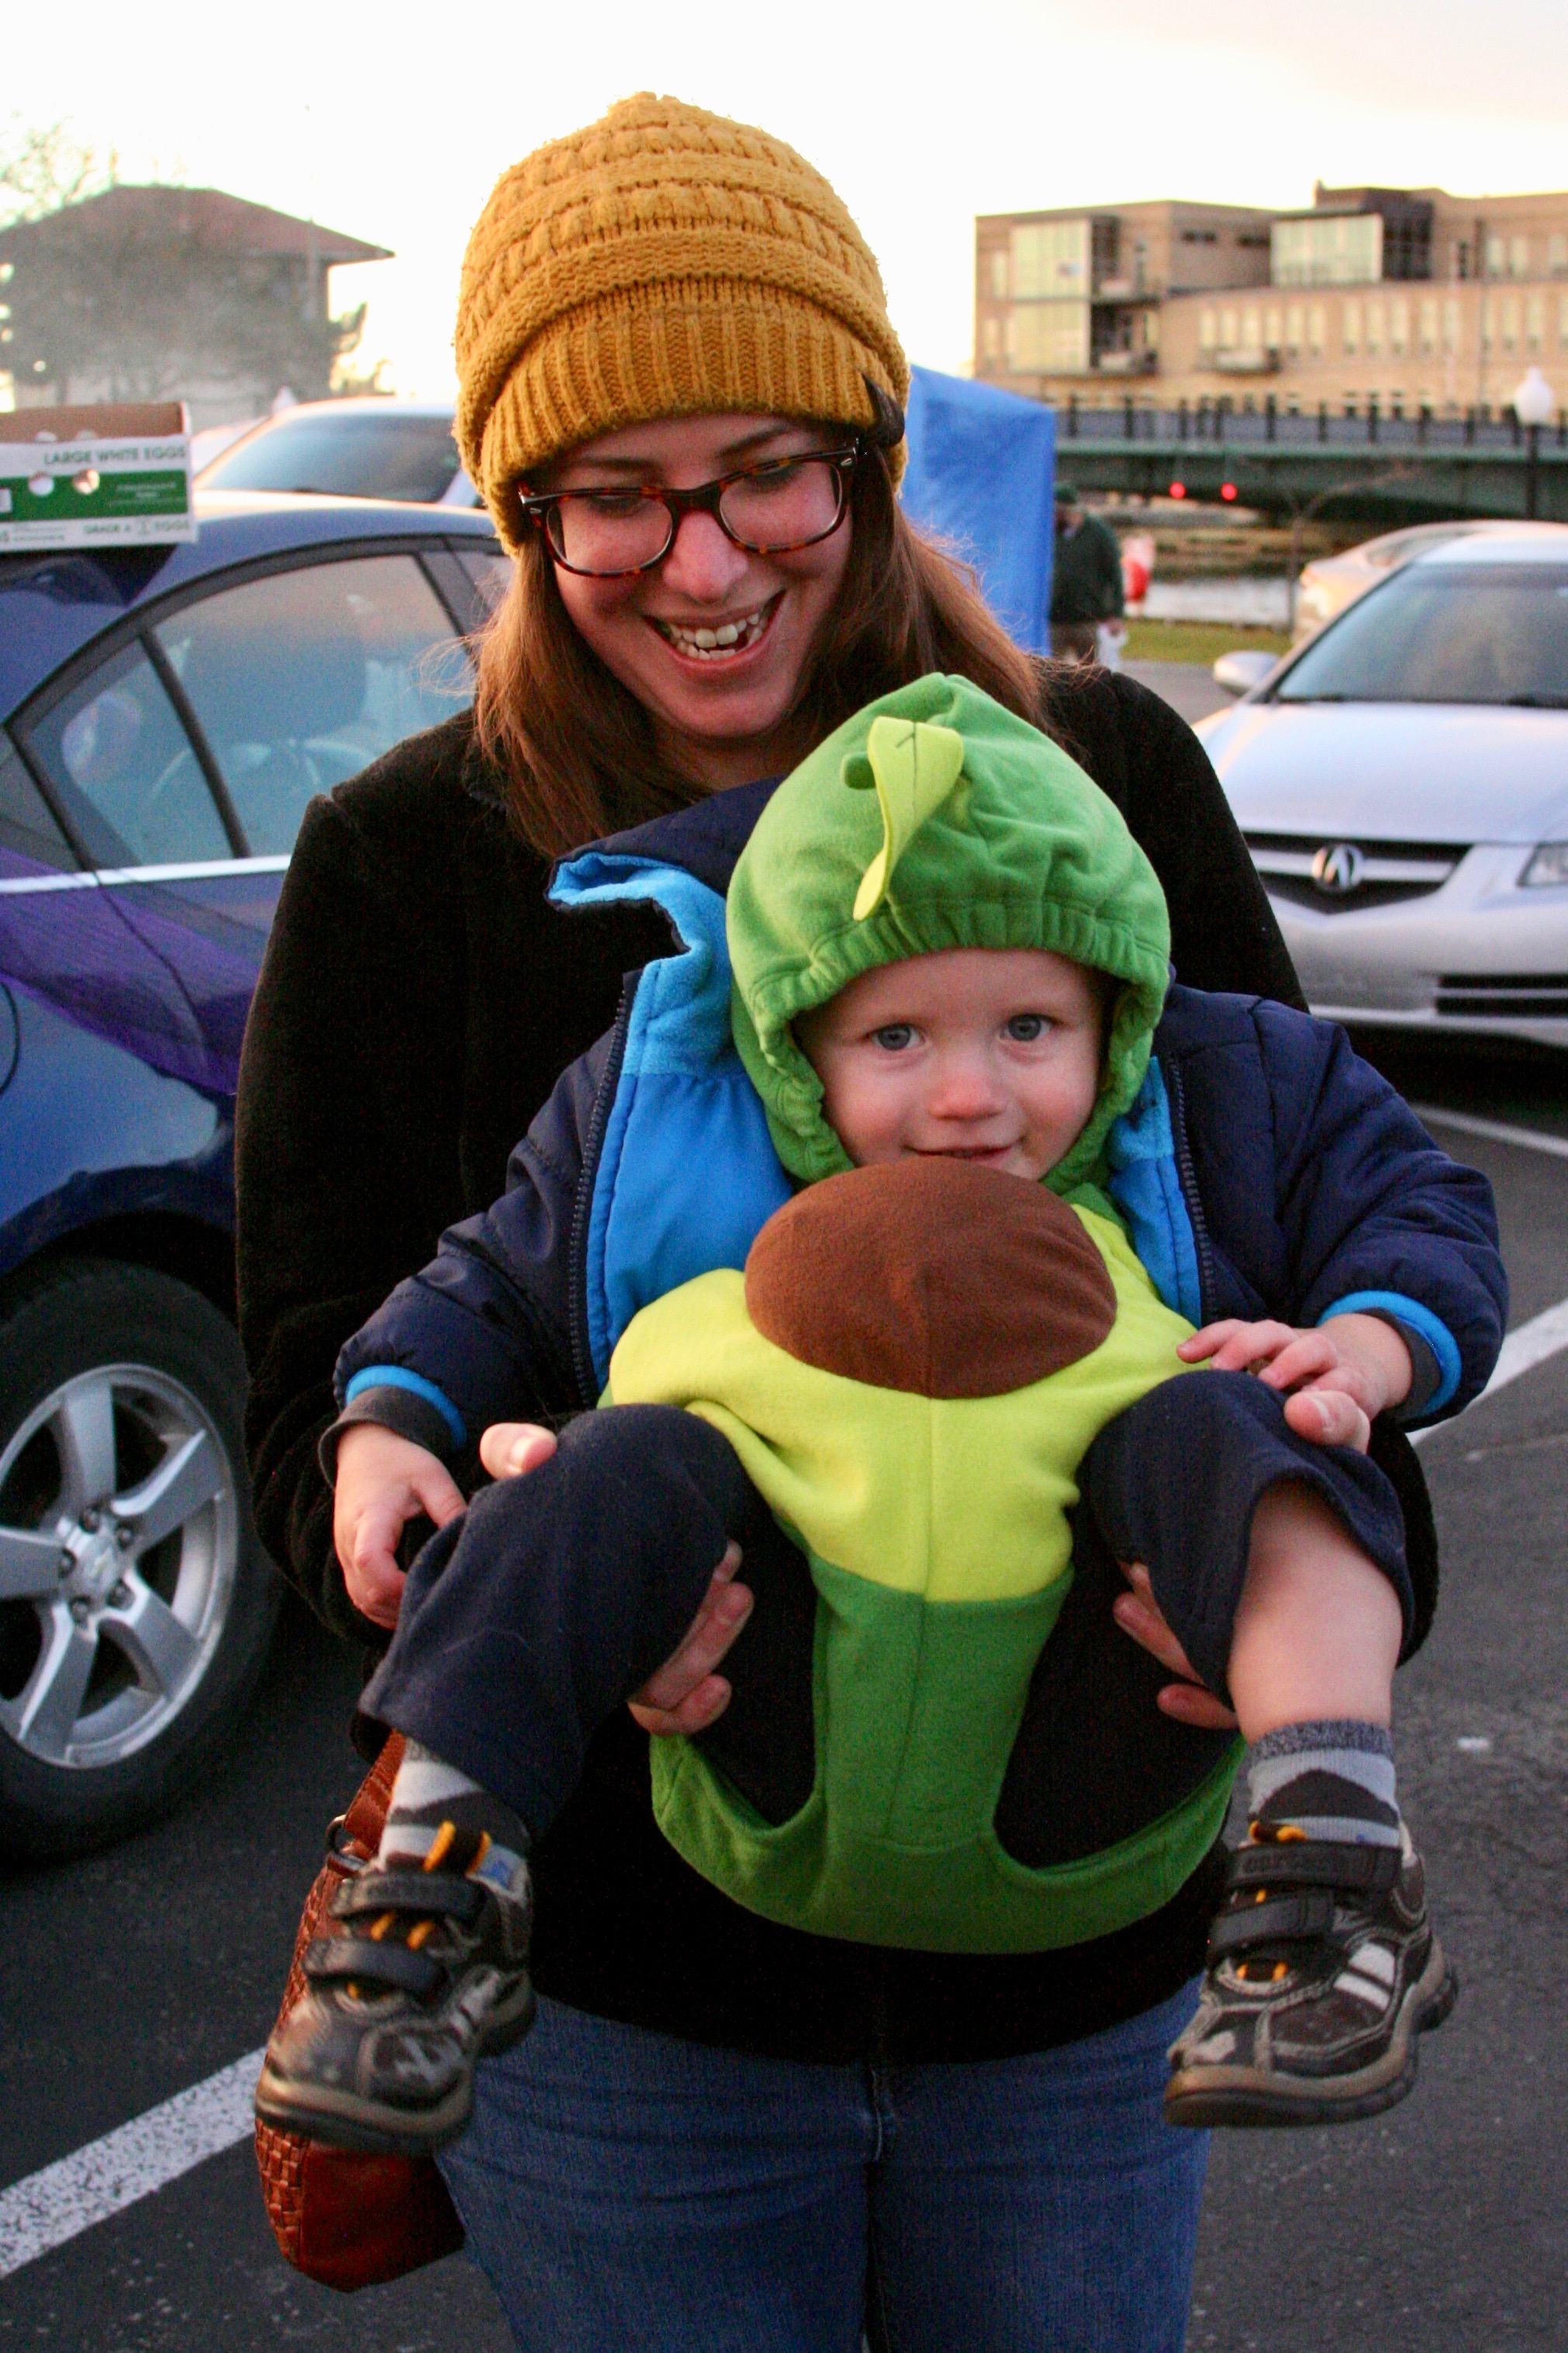 Woman holding child dressed as an avocado